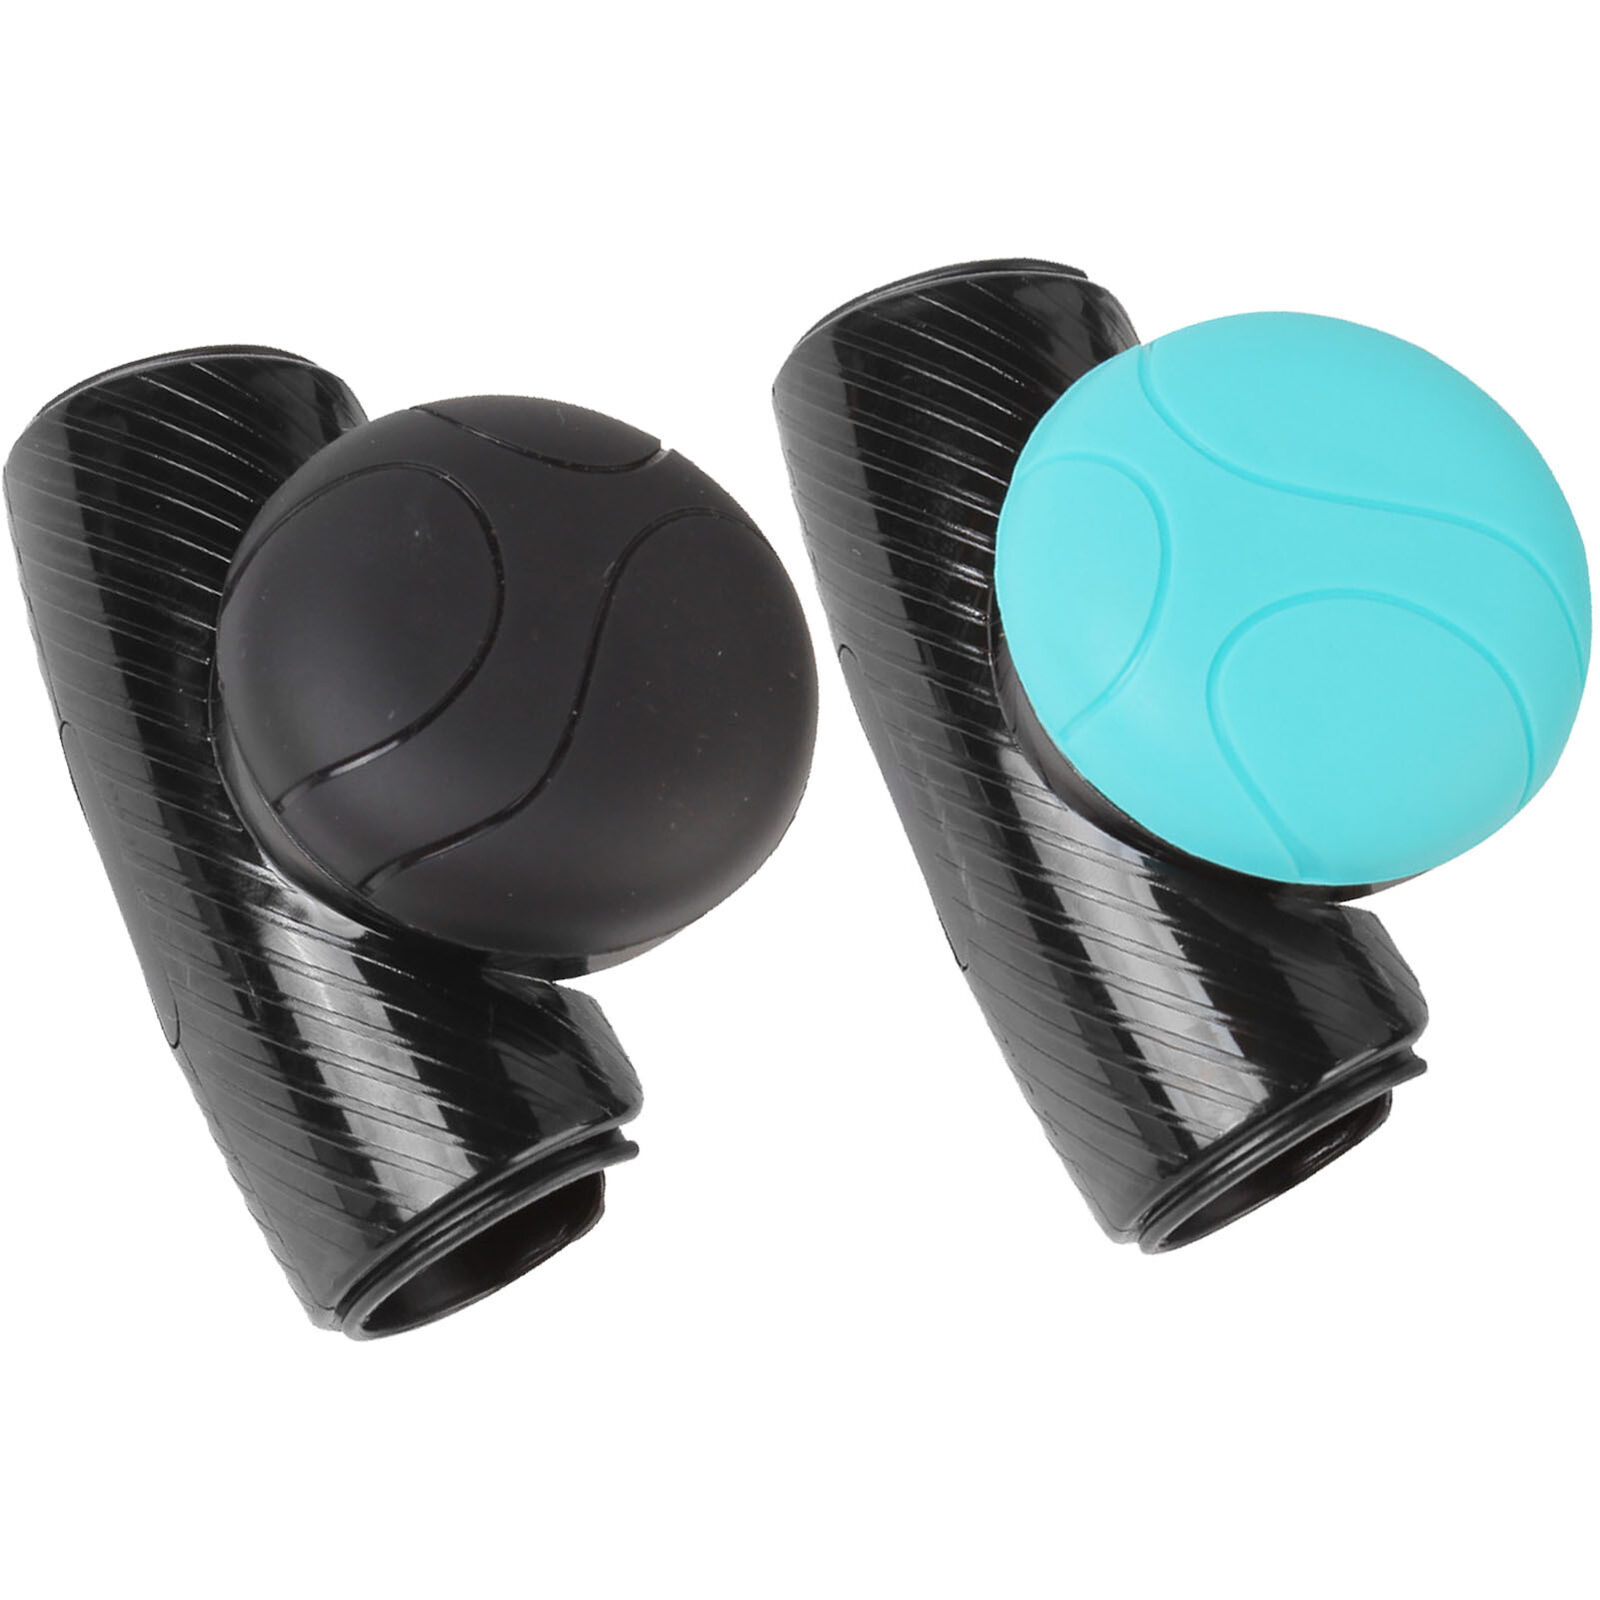 Car Steering Wheel Handle Assister Spinner Knob Ball Auto Silicone Universal